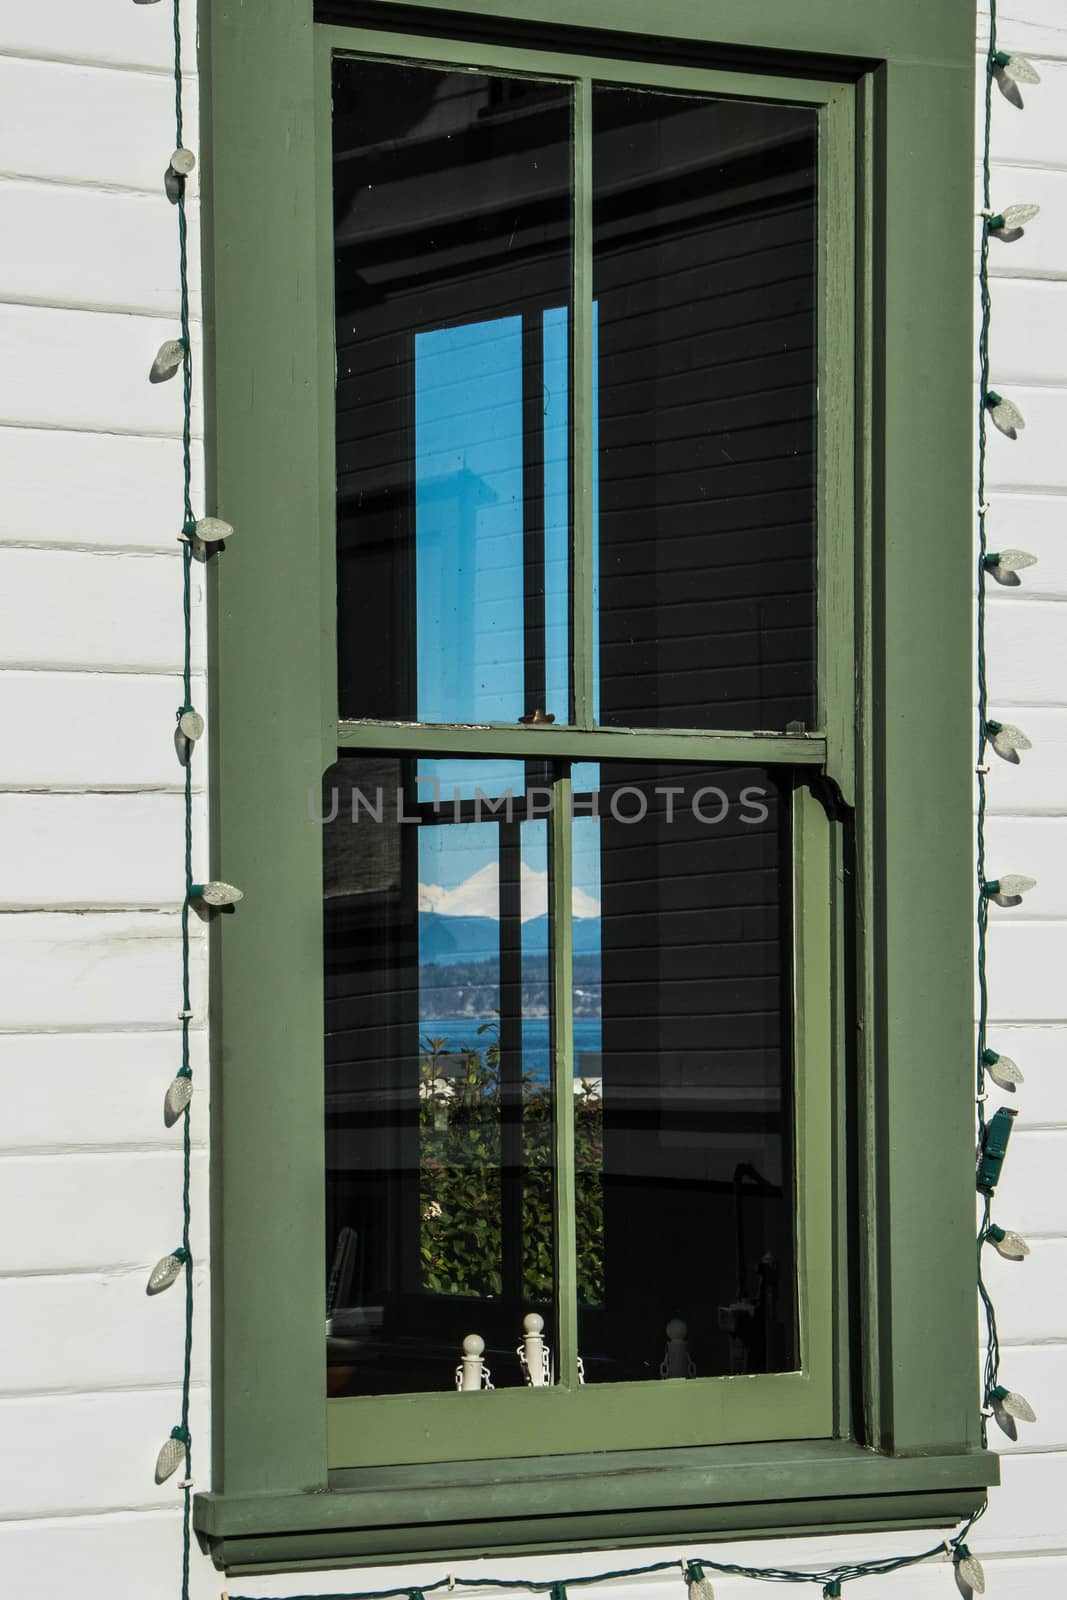 Windows in lighthouse keeper's shed showing clear blue sky and Mukilteo Lighthouse reflected